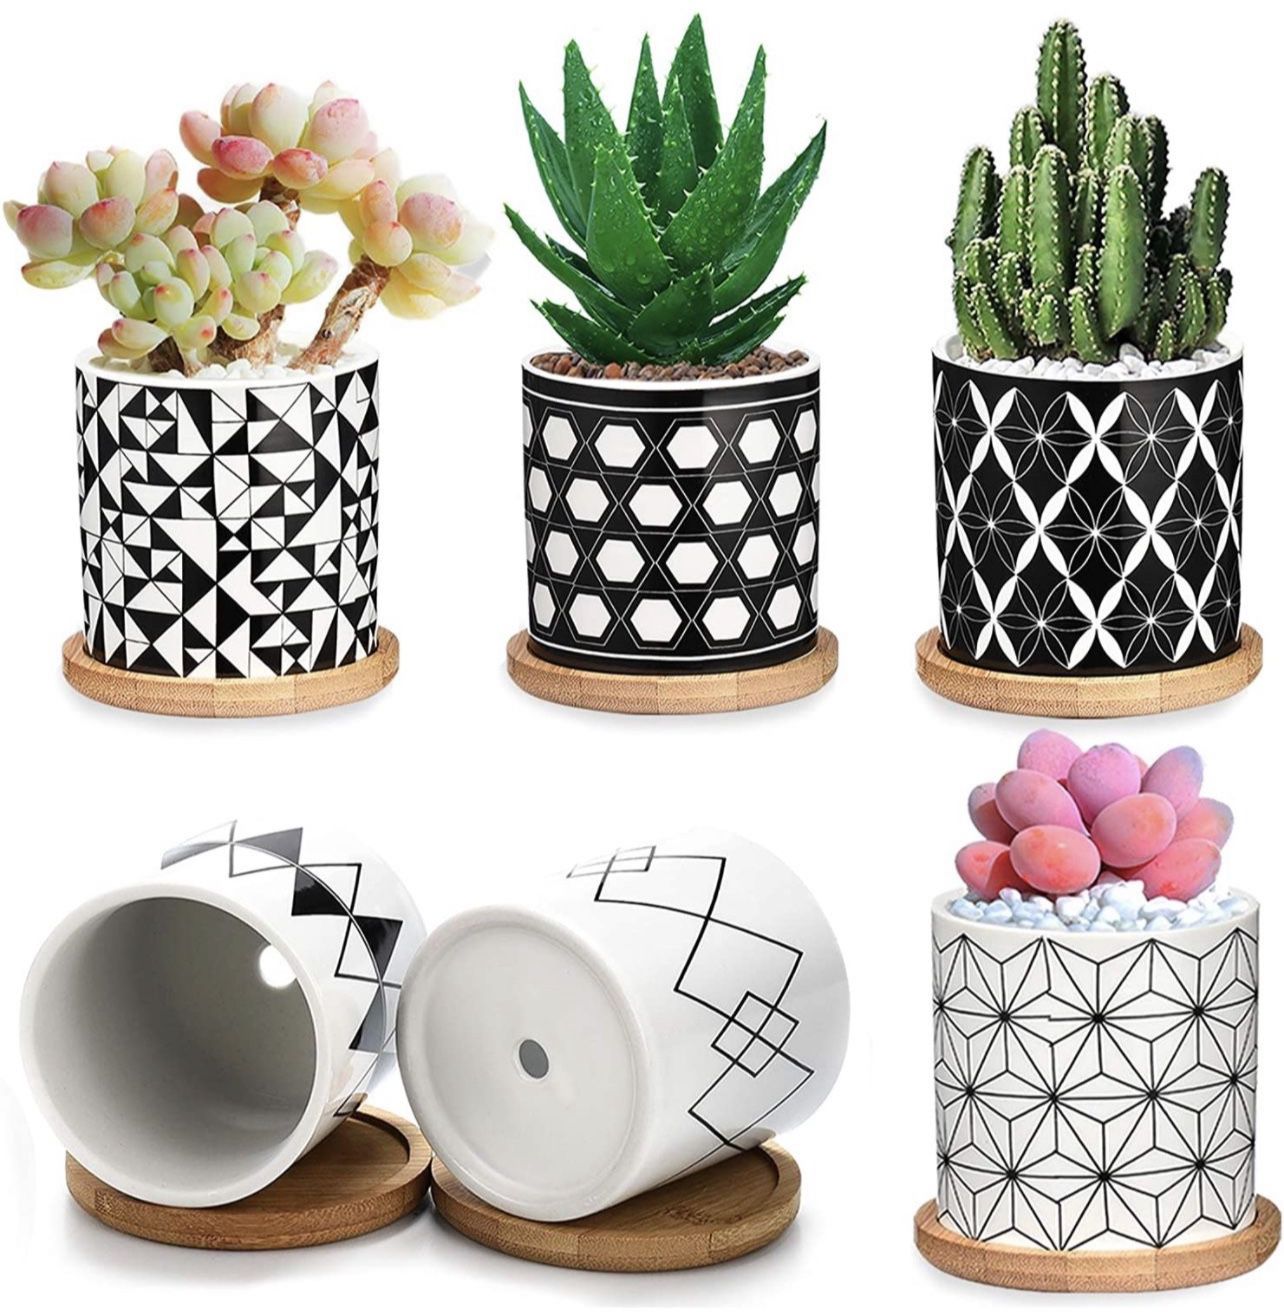 Succulent Pots 6 Pack,3 Inch Ceramic Planter with Drainage and Bamboo Tray, Geometric Patterns Small Plant Pots Decor for Home and Office - Plants NOT